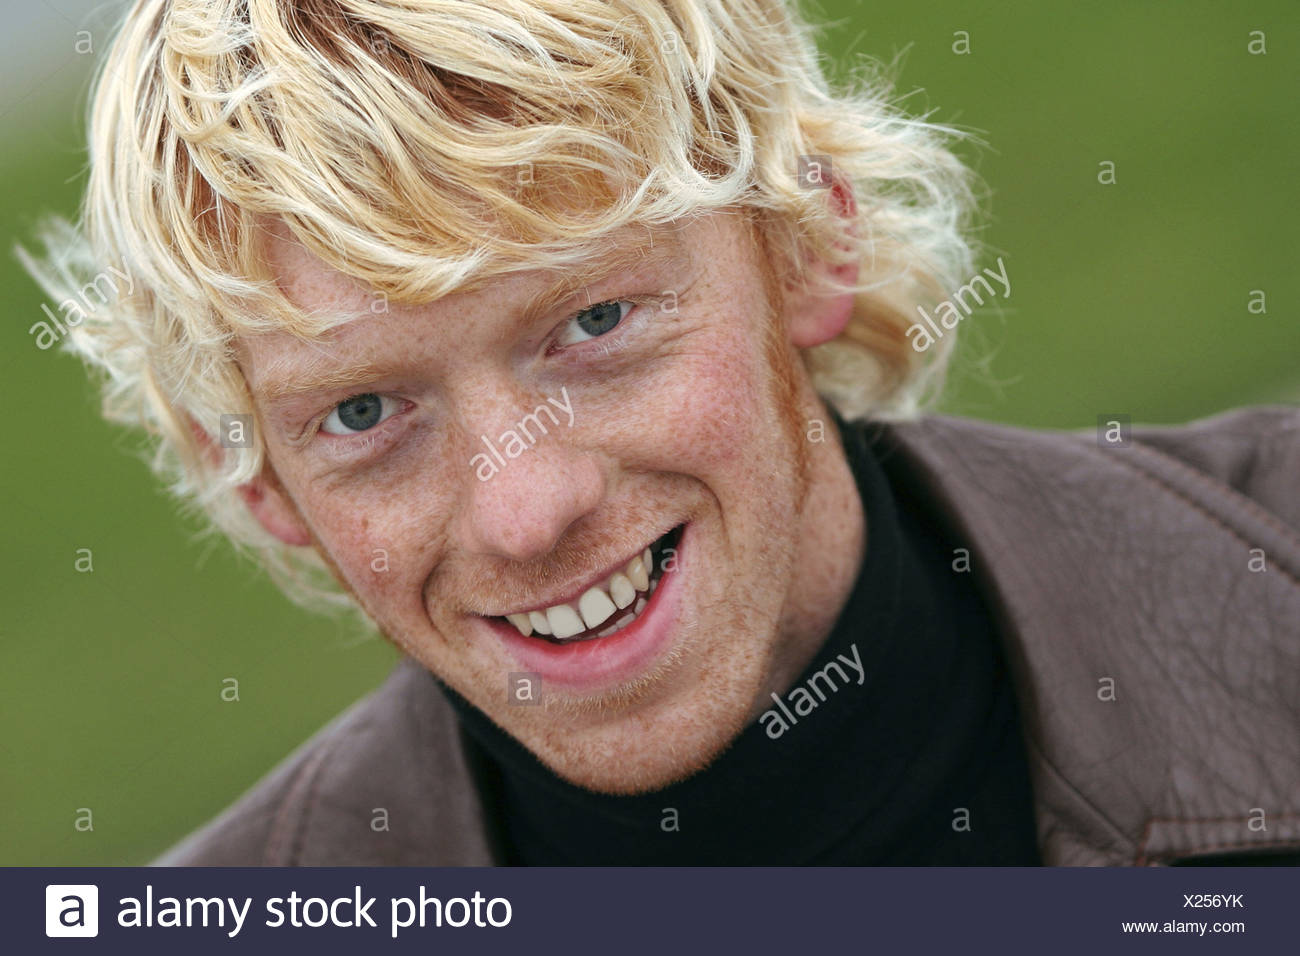 Joung Blond Man With A Three Day Beard High Resolution Stock Photography And Images Alamy